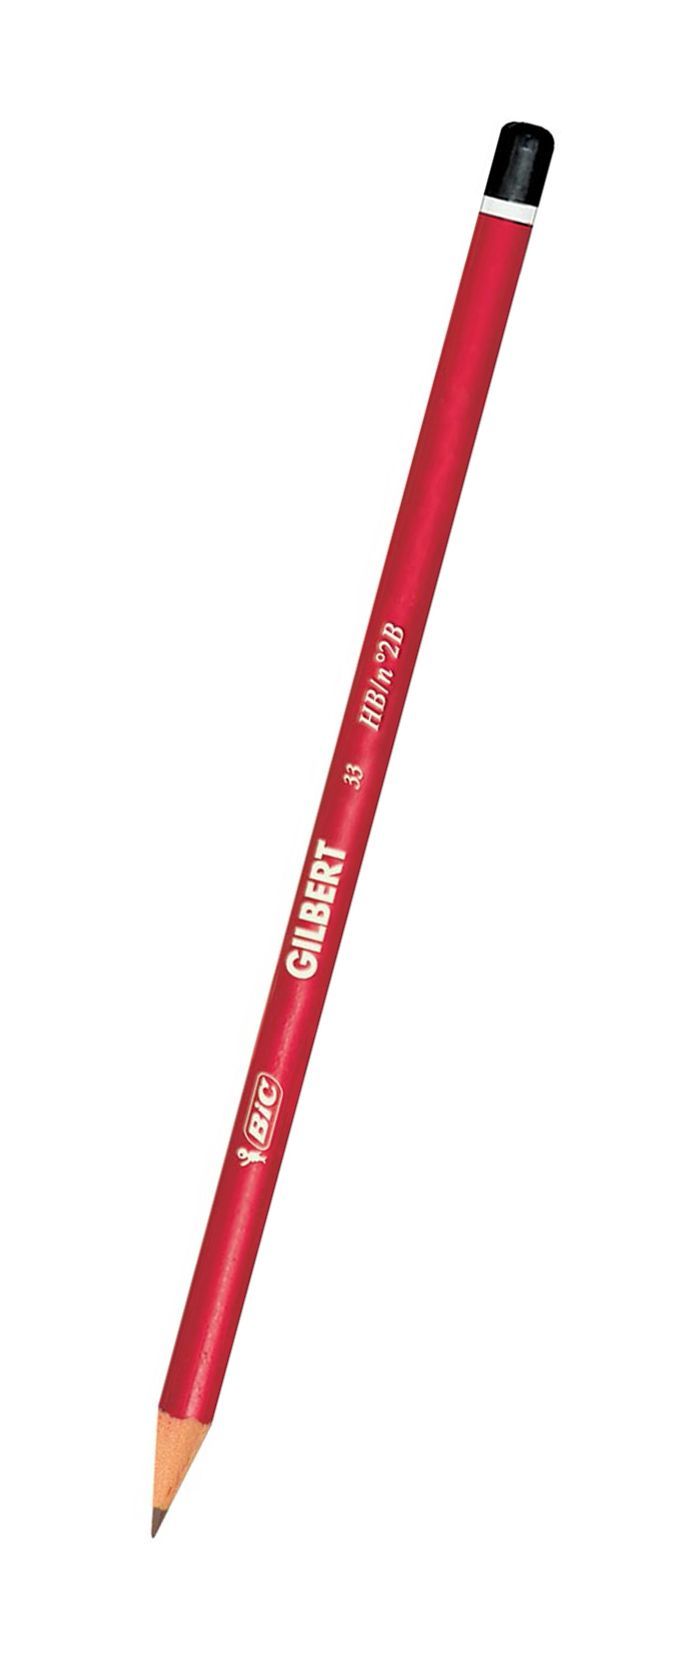 Taille Crayon Bic Bulle - 2 trous BIC